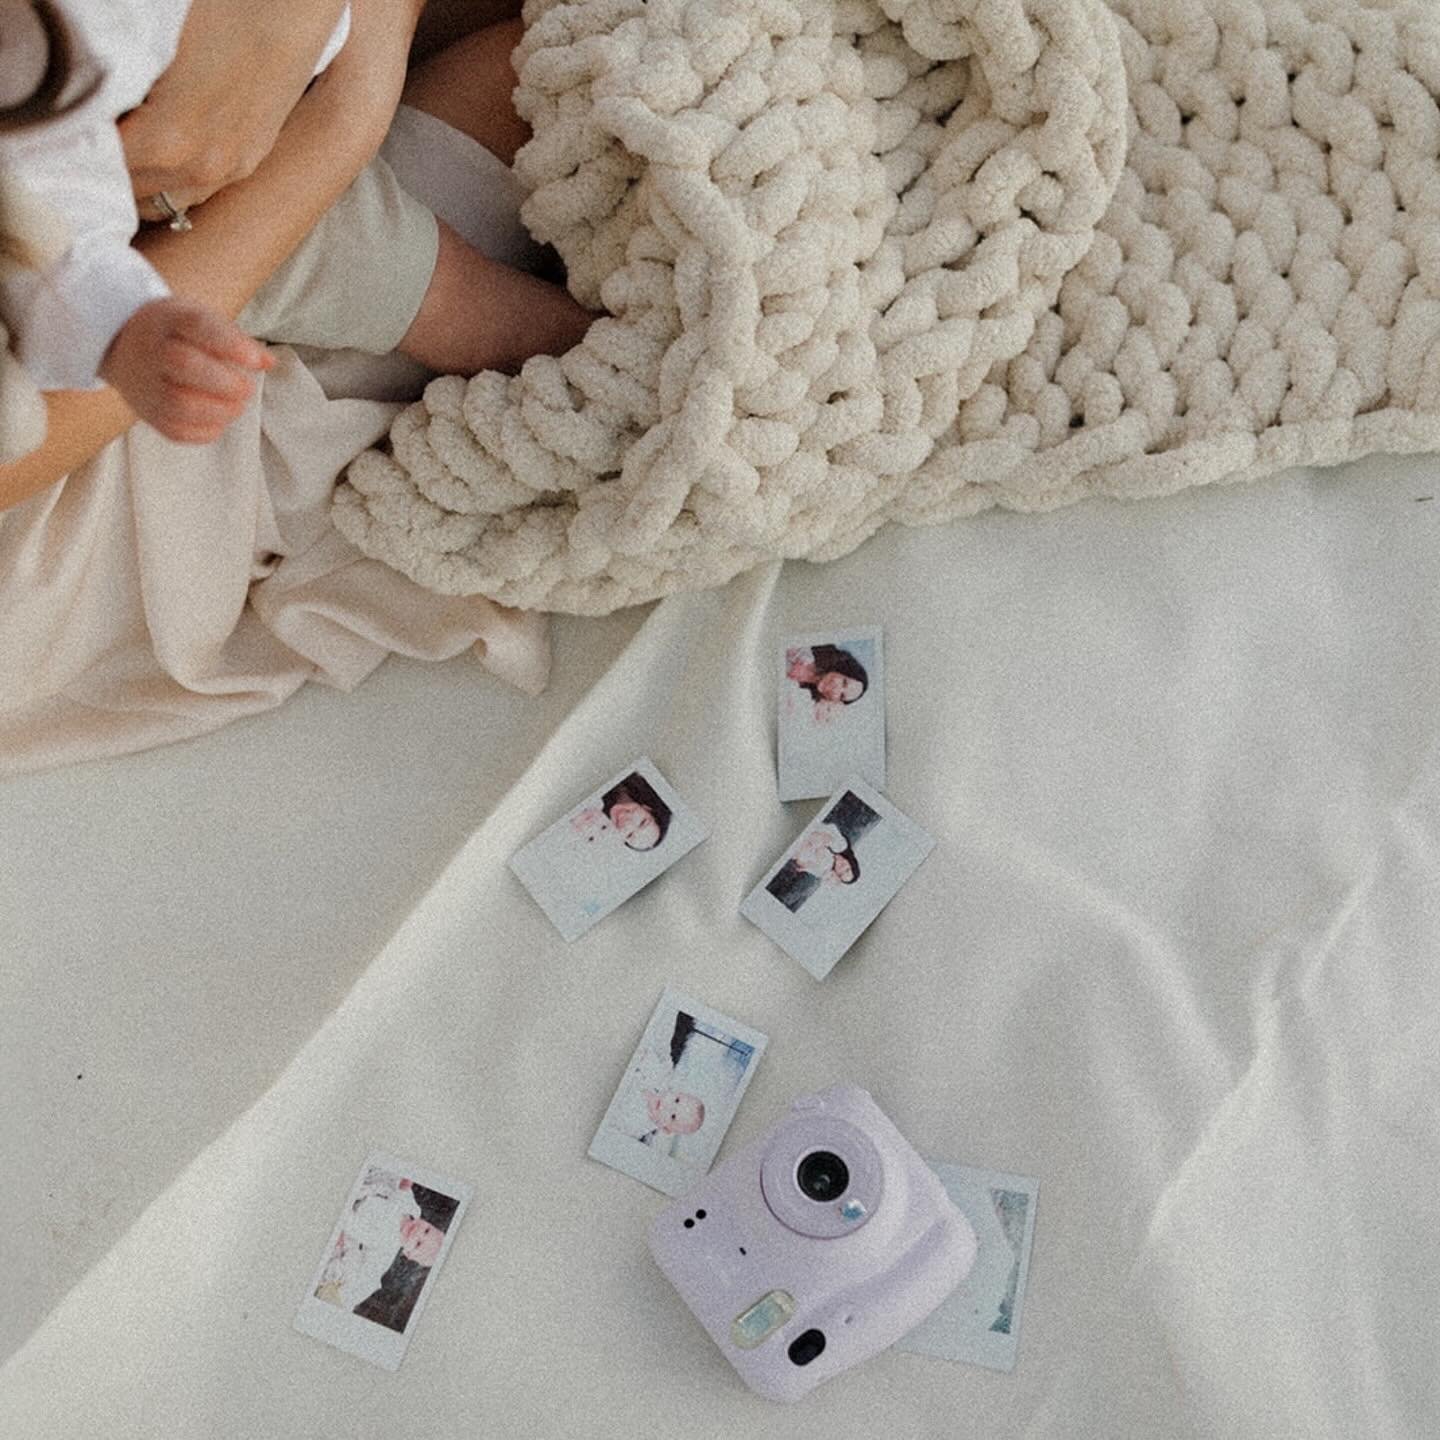 Collecting memories with tiny hands 🎞️

Dare I say motherhood sessions are my current favorite? Slowing down to soak in the sticky fingers and chubby toes and tiny eye lashes is quite possibly the best gift you could ever give yourself to fall in lo